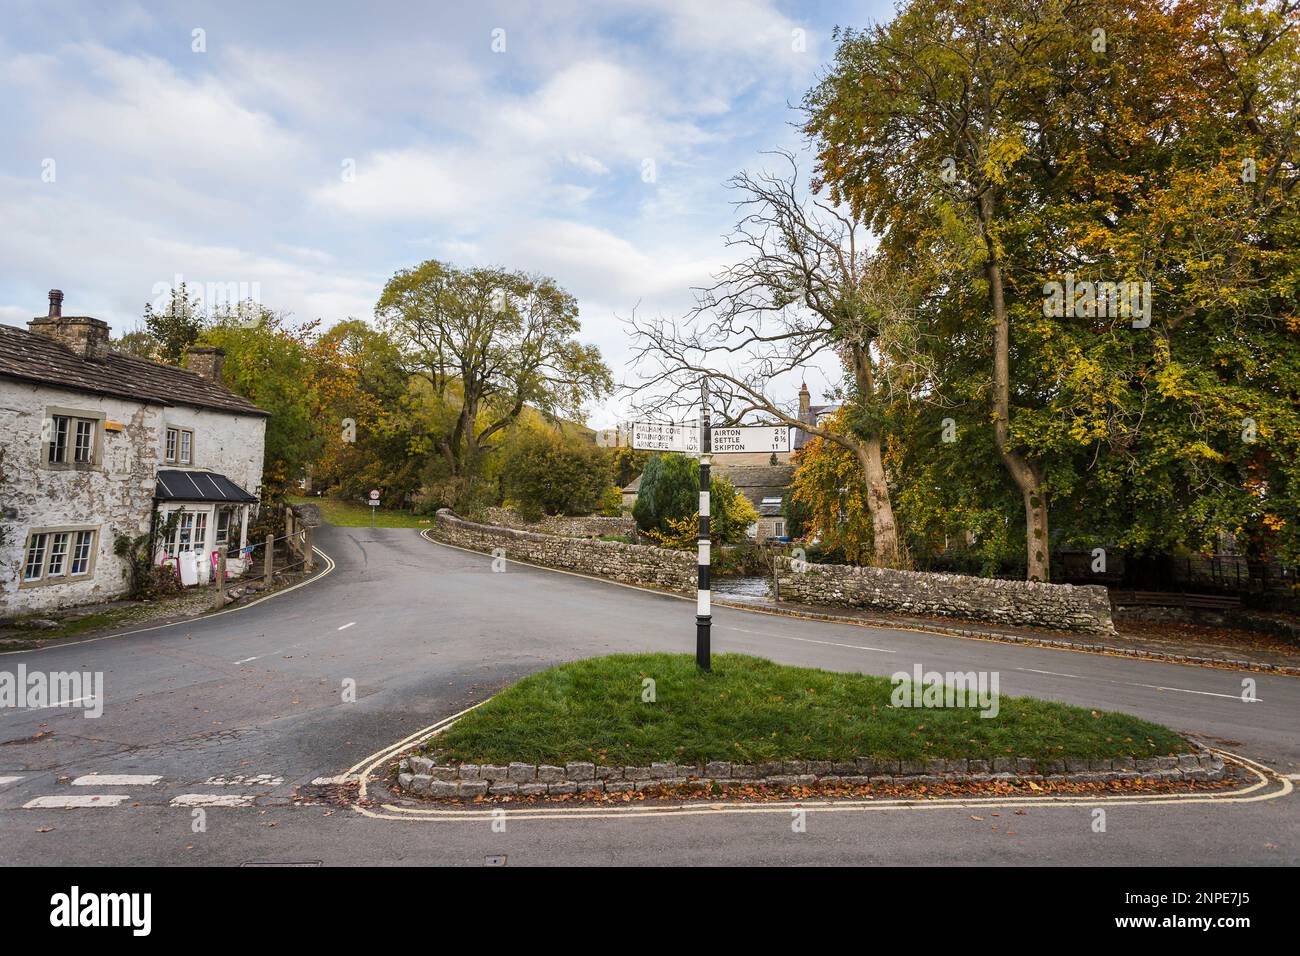 An old sign post on a grass triangle in the village of Malham. Stock Photo